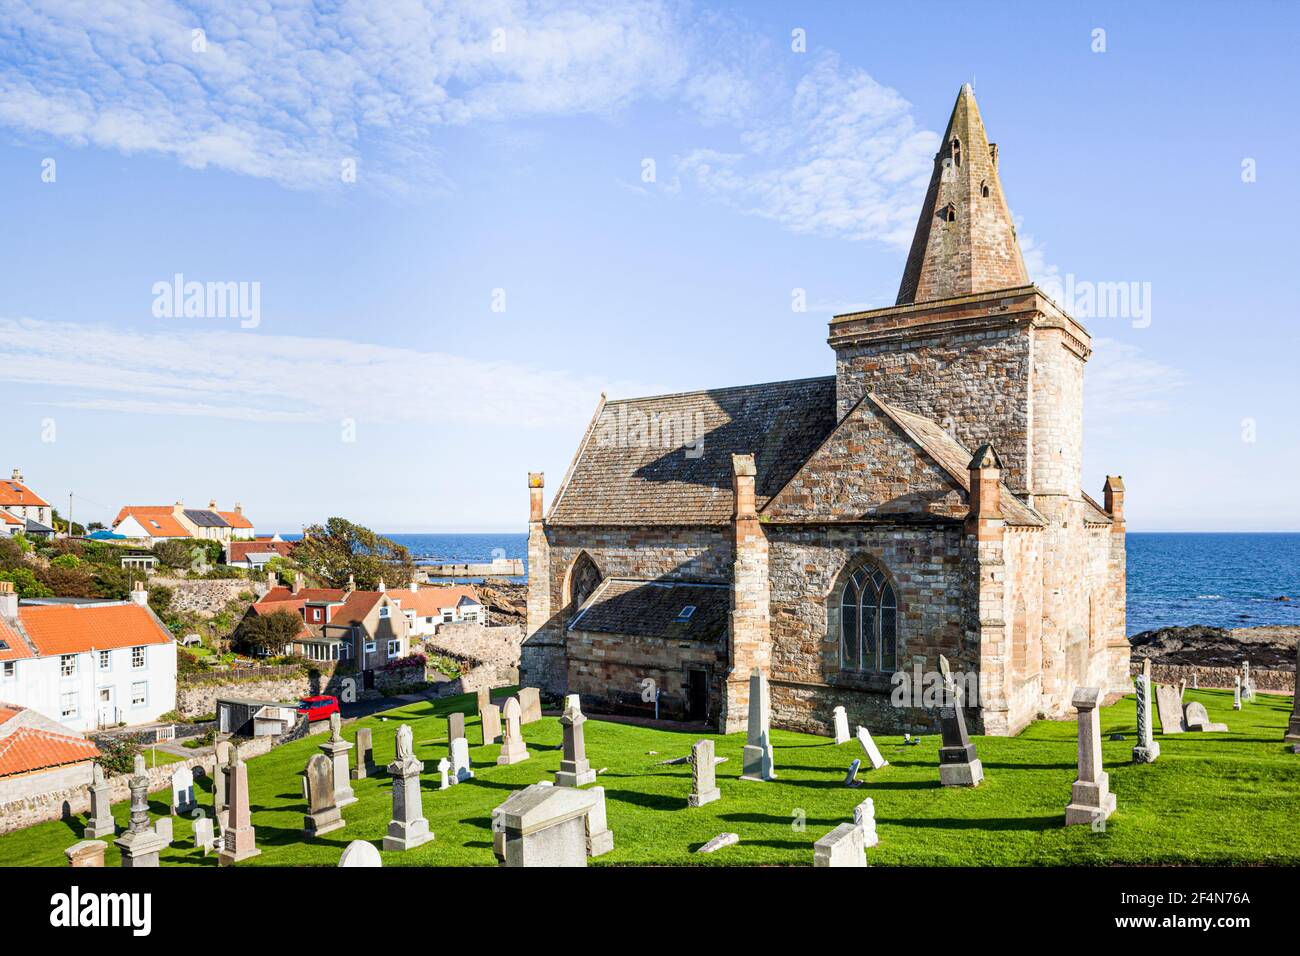 St Monans Parish church (also known as The Auld Kirk) 20 metres from the sea at St Monans, Fife, Scotland UK Stock Photo